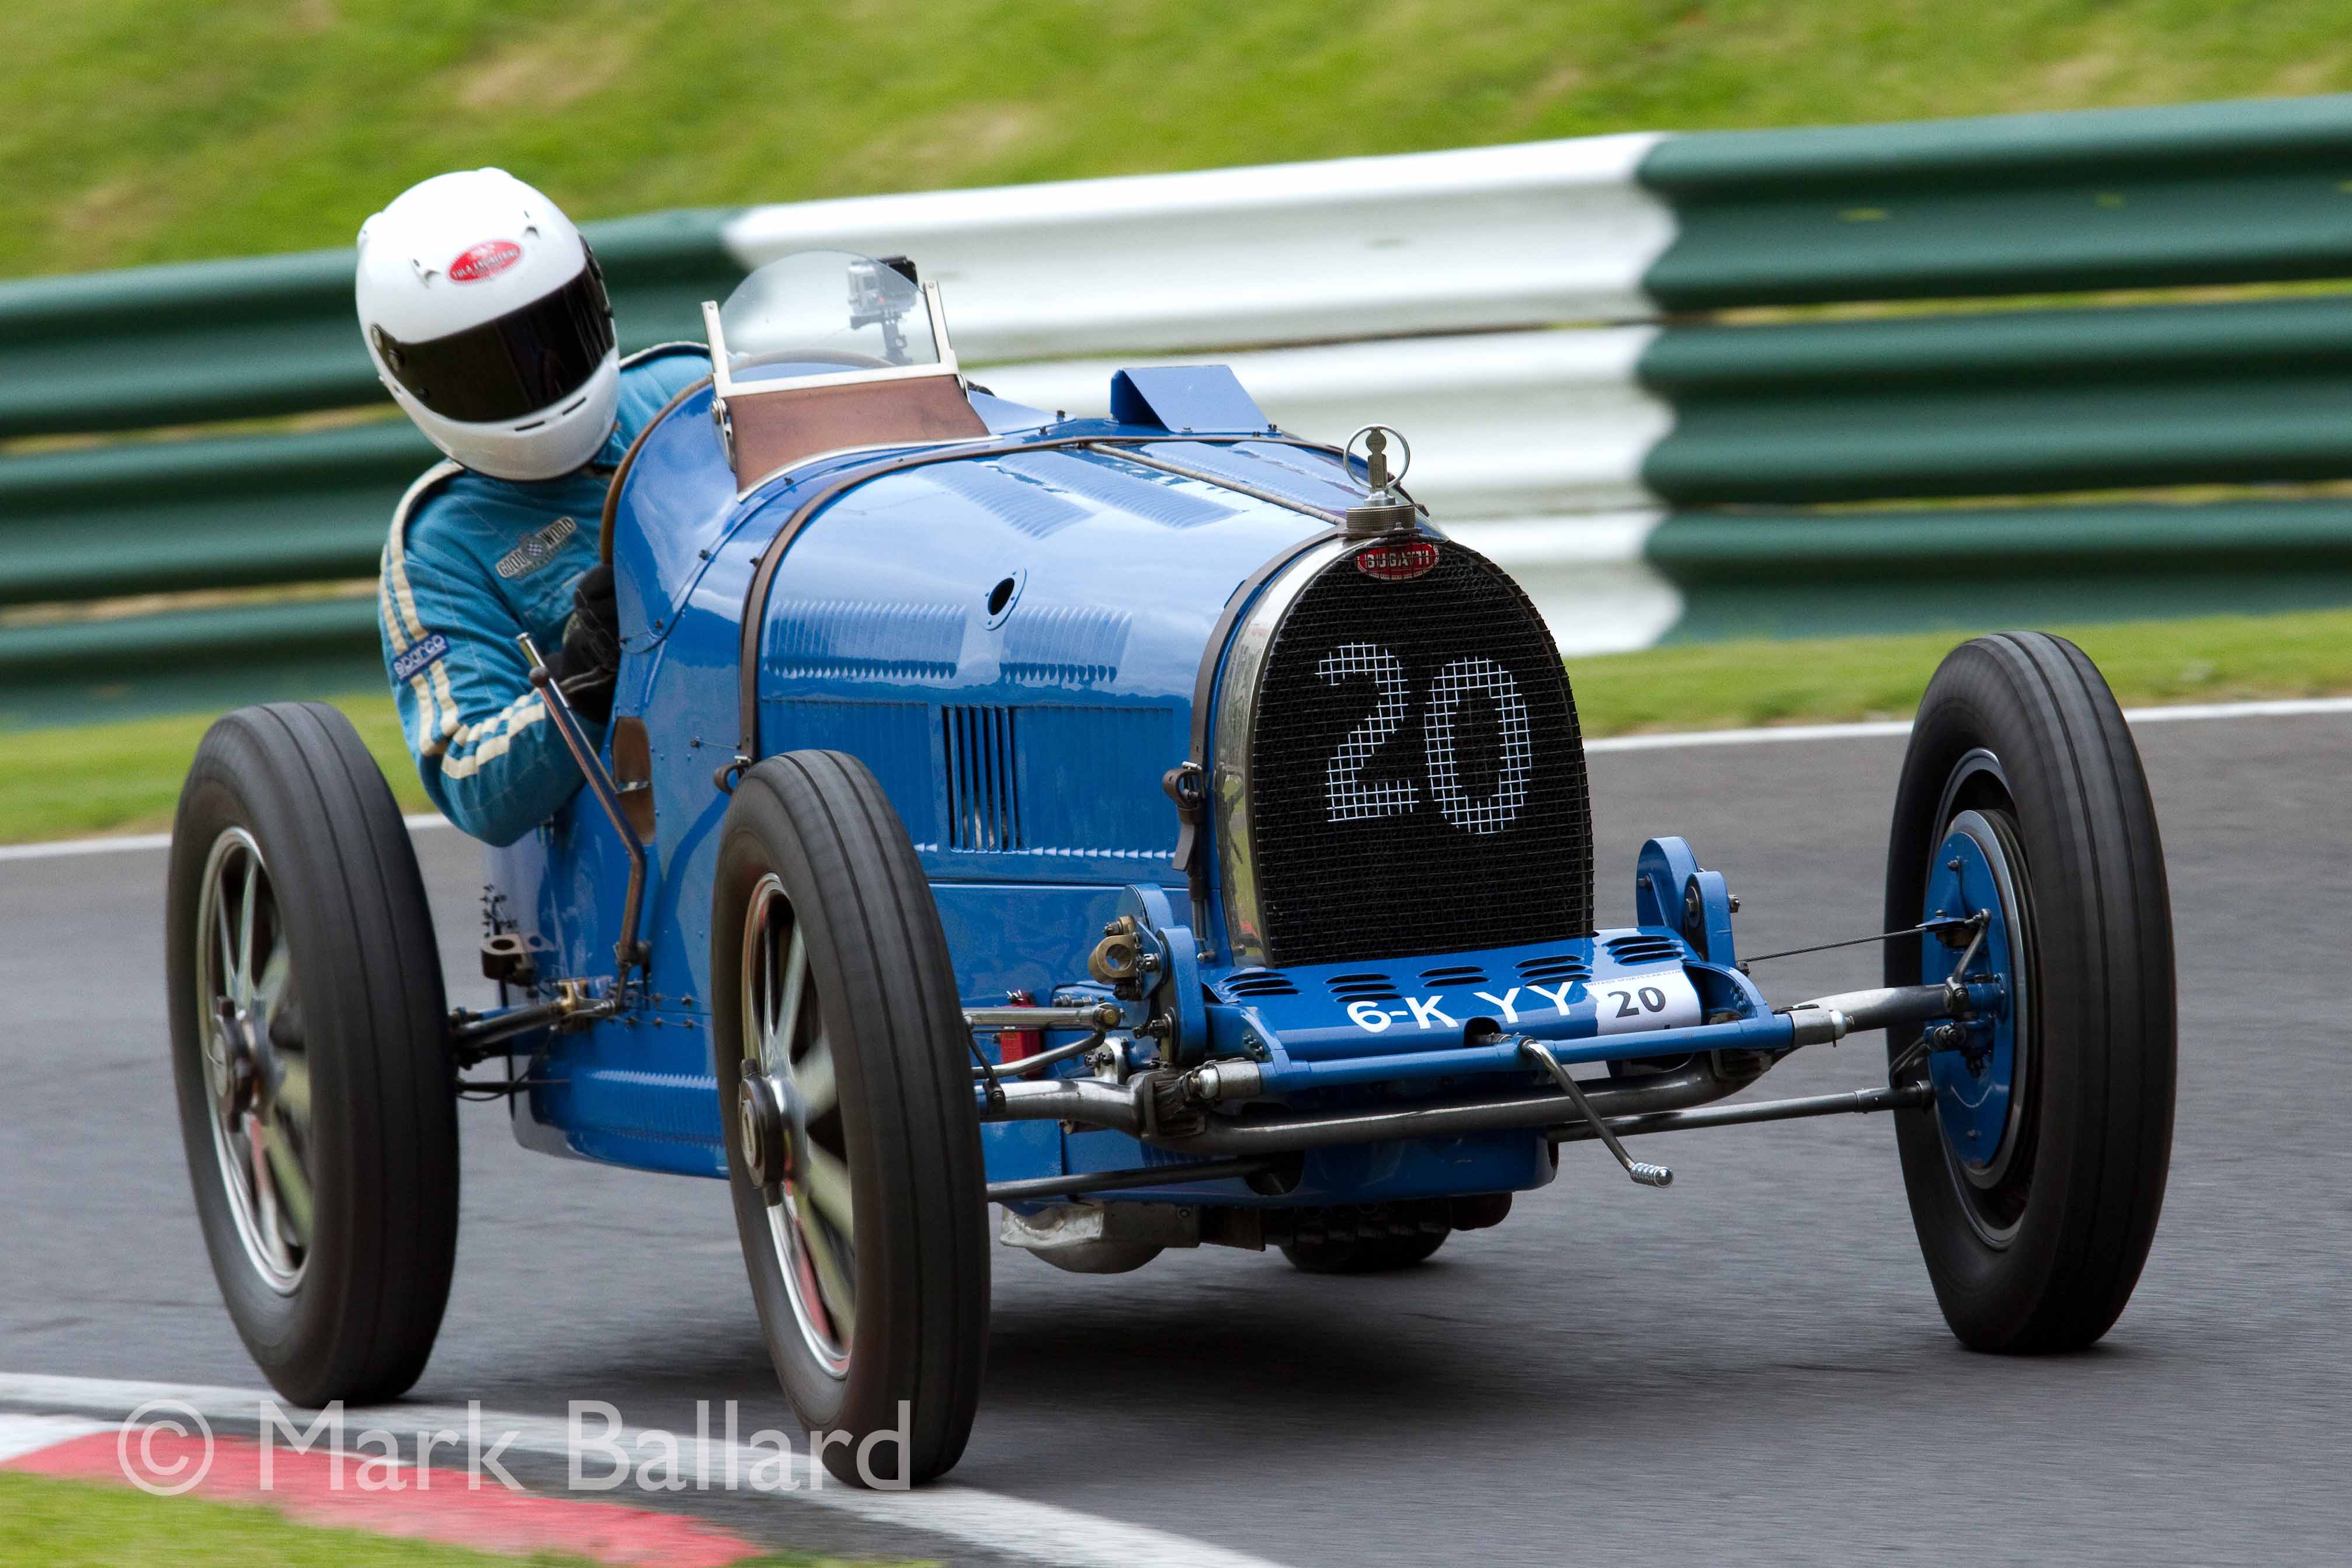 The Vintage Sports-Car Club and Cadwell Park join together to celebrate 80th Anniversaries this weekend cover